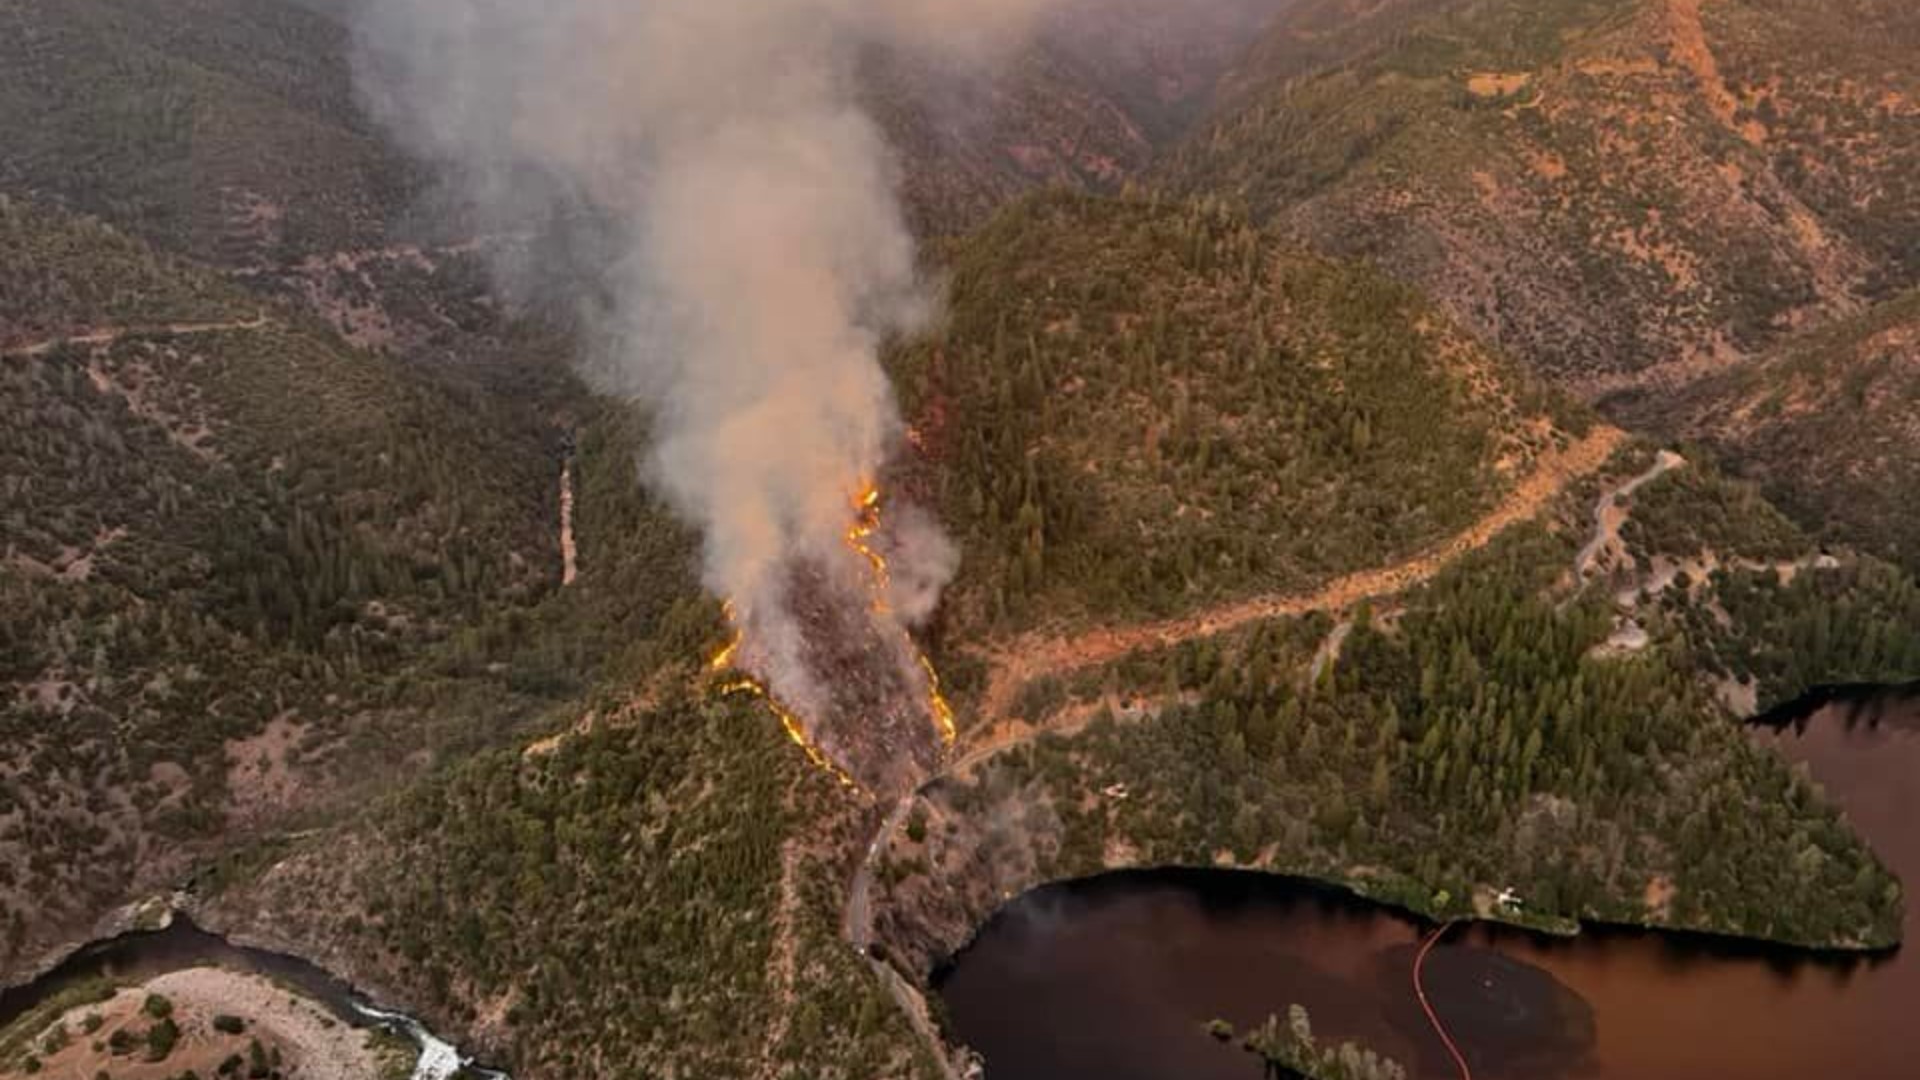 Mosquito Fire: Officials said the fire is burning near the Oxbow Reservoir in Tahoe National Forest.